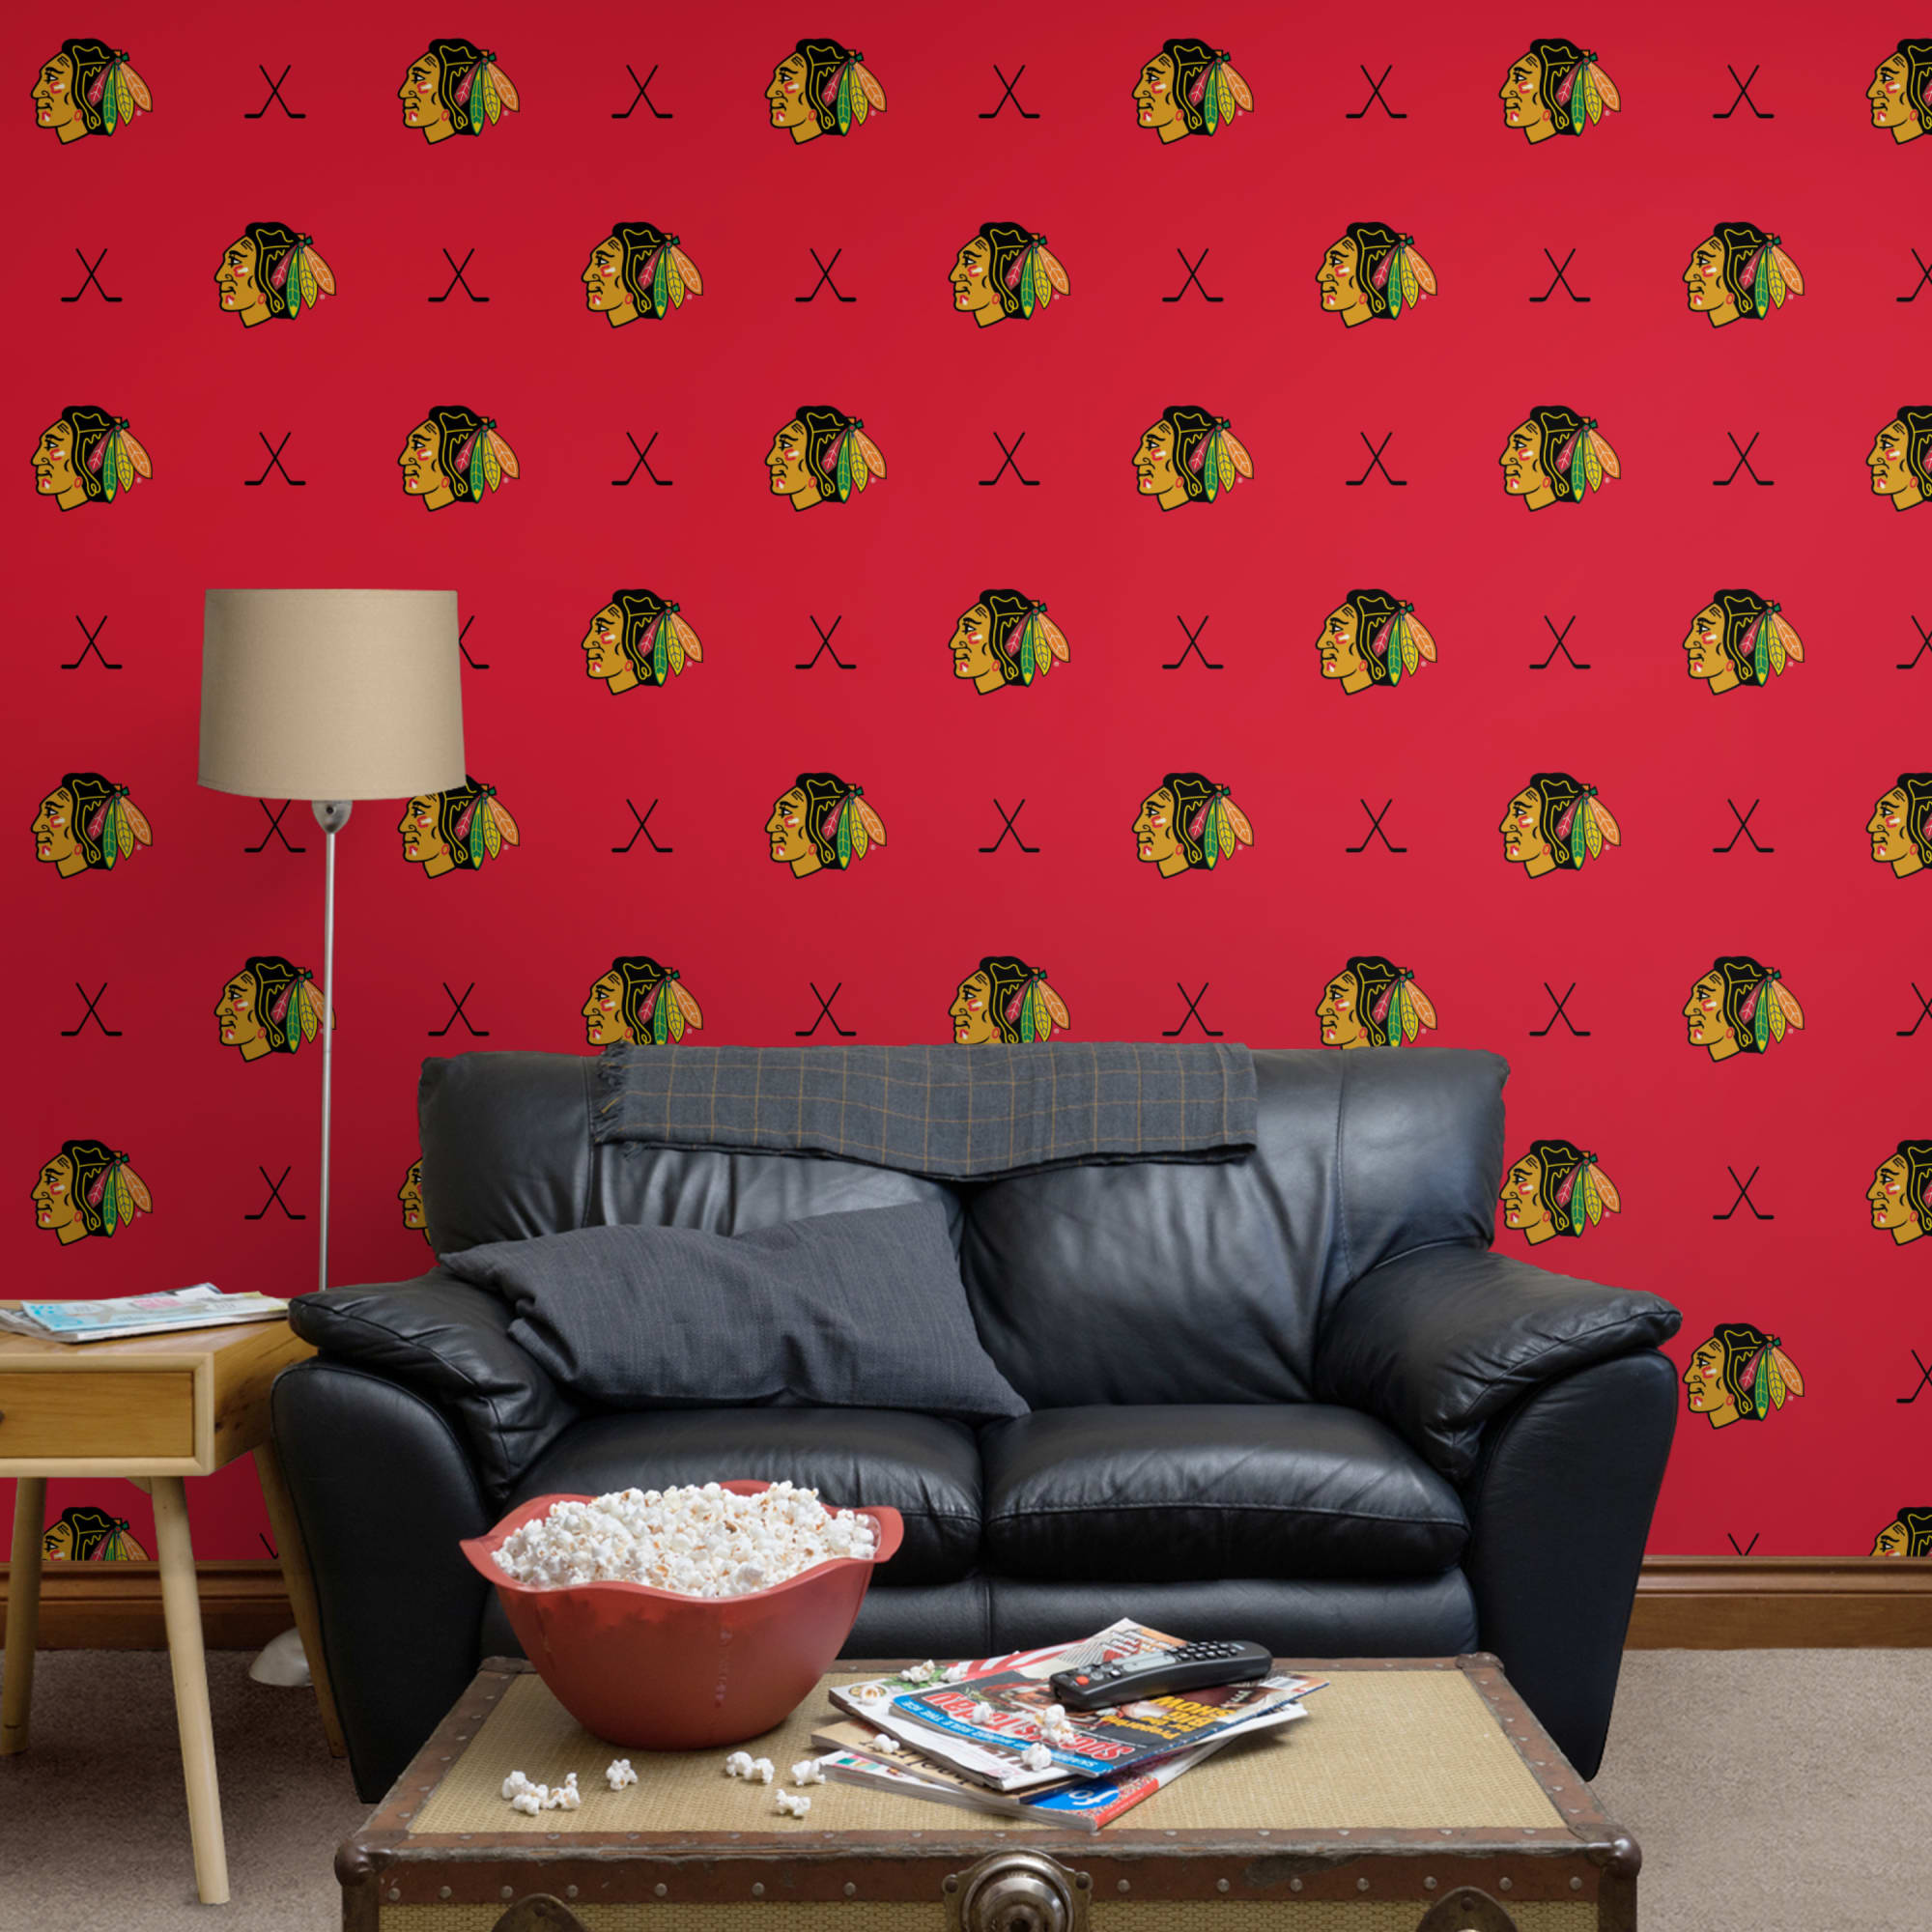 Chicago Blackhawks: Sticks Pattern - Officially Licensed NHL Removable Wallpaper 12" x 12" Sample by Fathead | 100% Vinyl